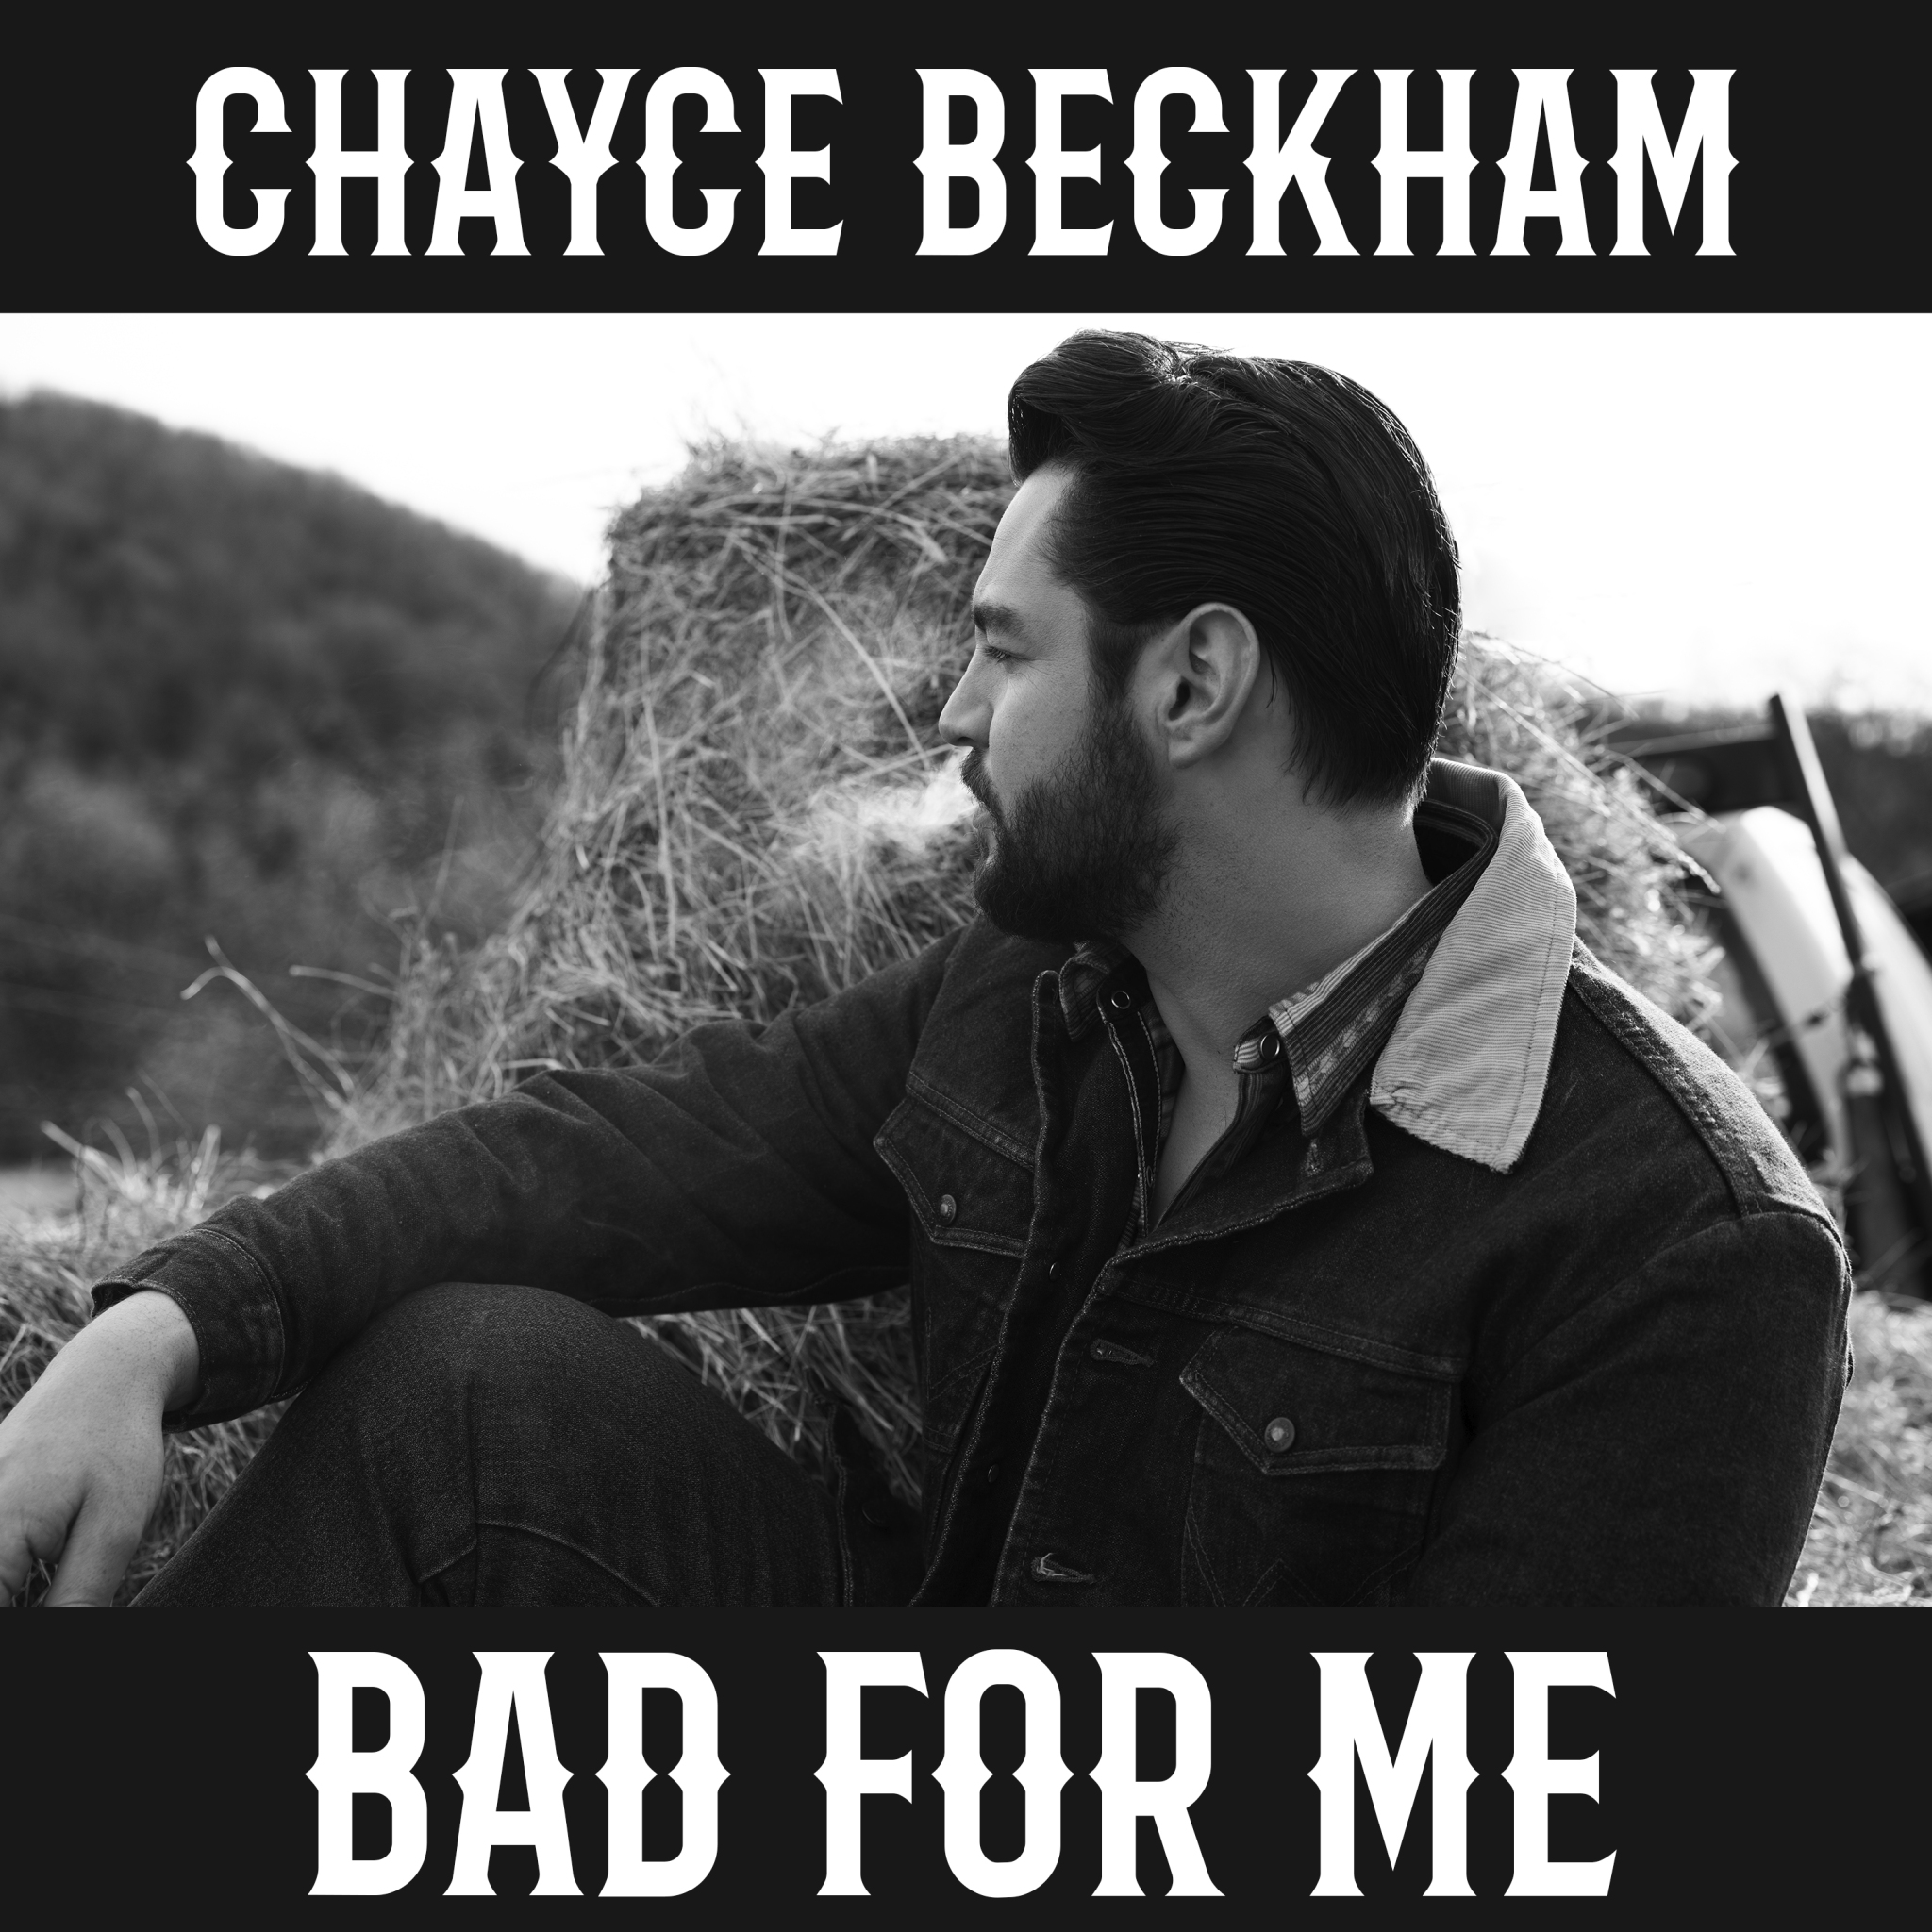 Bad For Me: The Chayce Beckham Interview